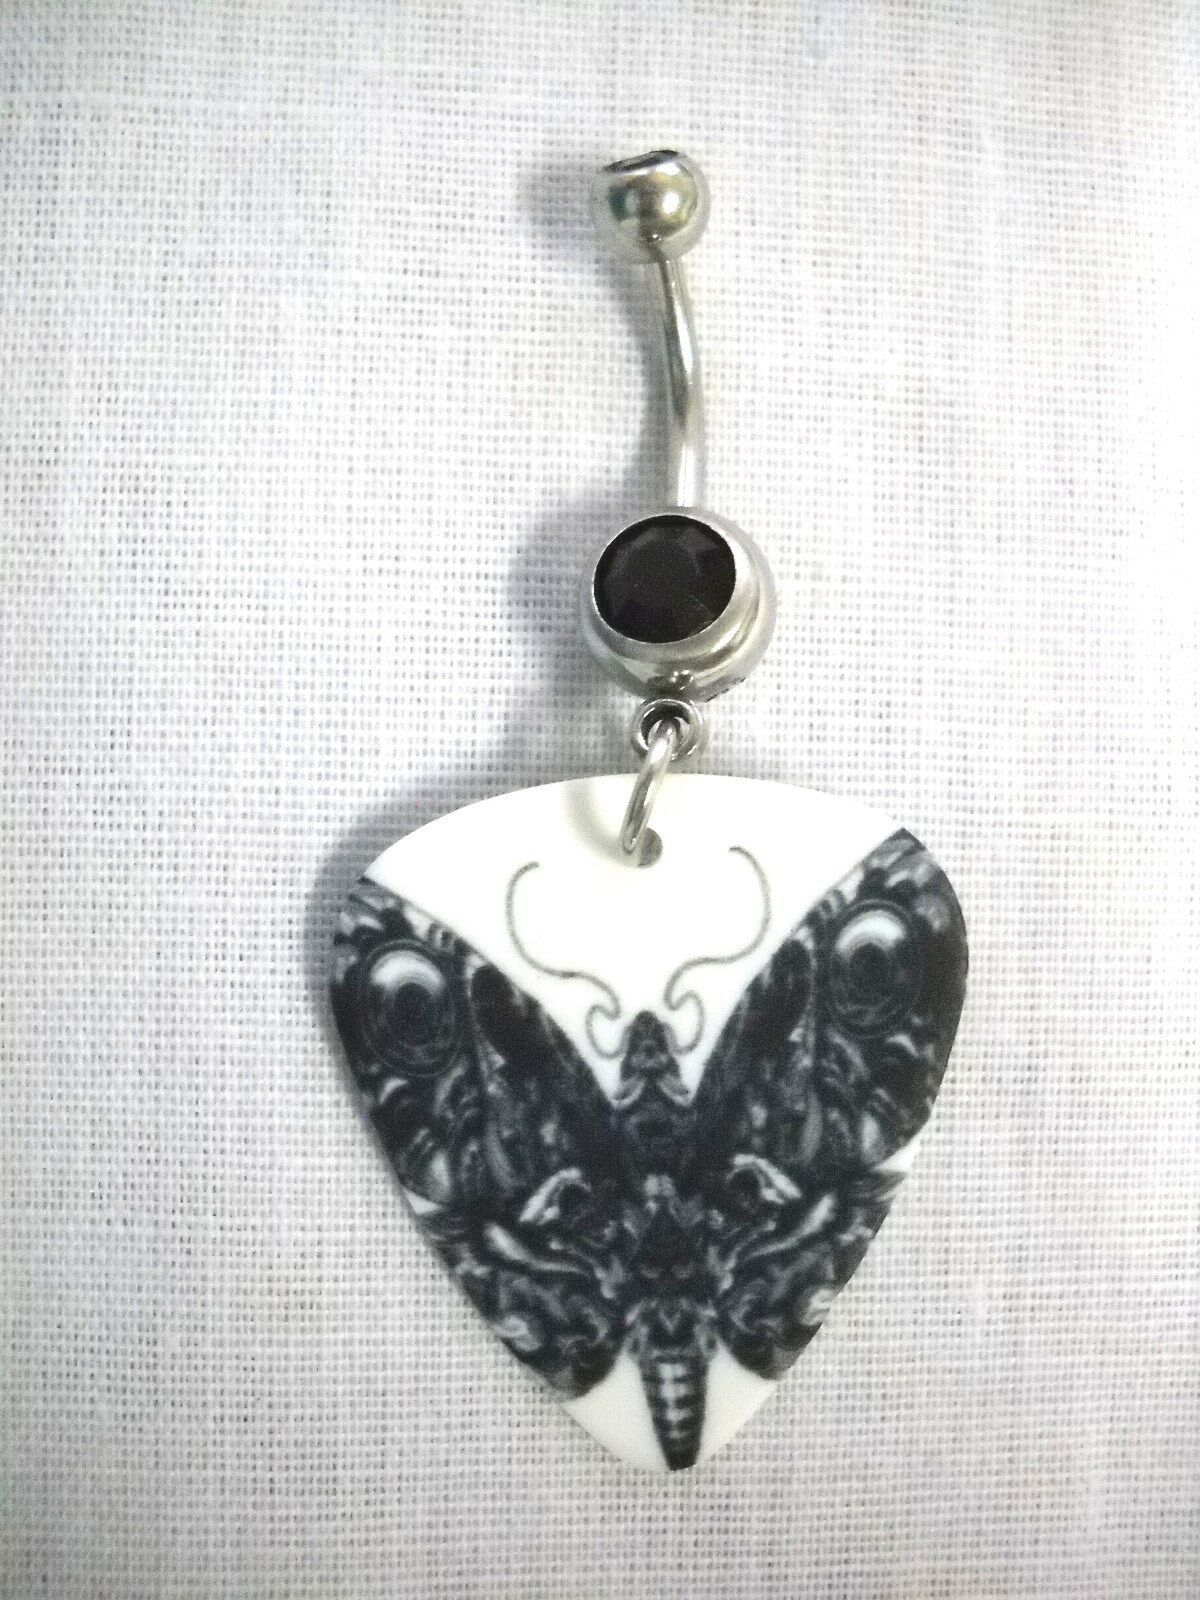 Primary image for BLACK ON WHITE FLYING ART DECO MOTH PRINTED GUITAR PICK 14g BELLY RING BARBELL